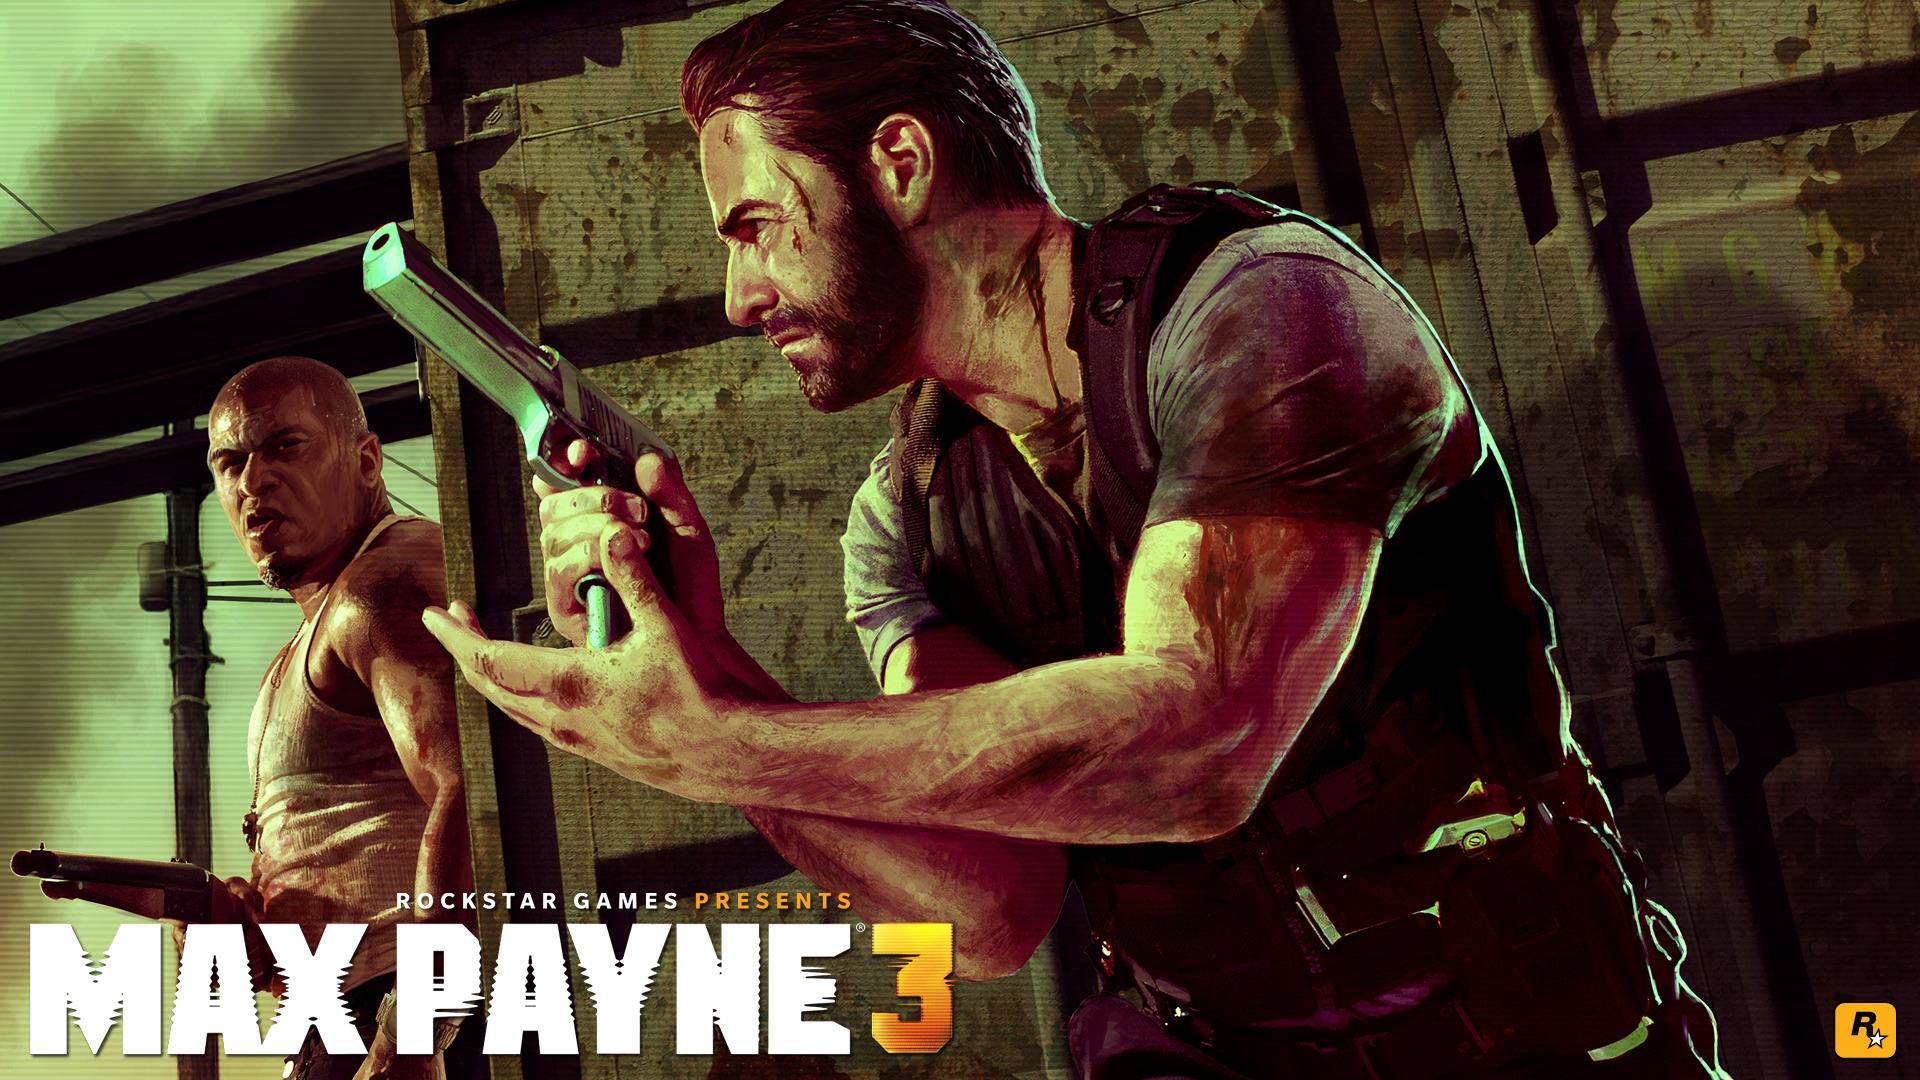 Max Payne 2012 for 1920 x 1080 HDTV 1080p resolution